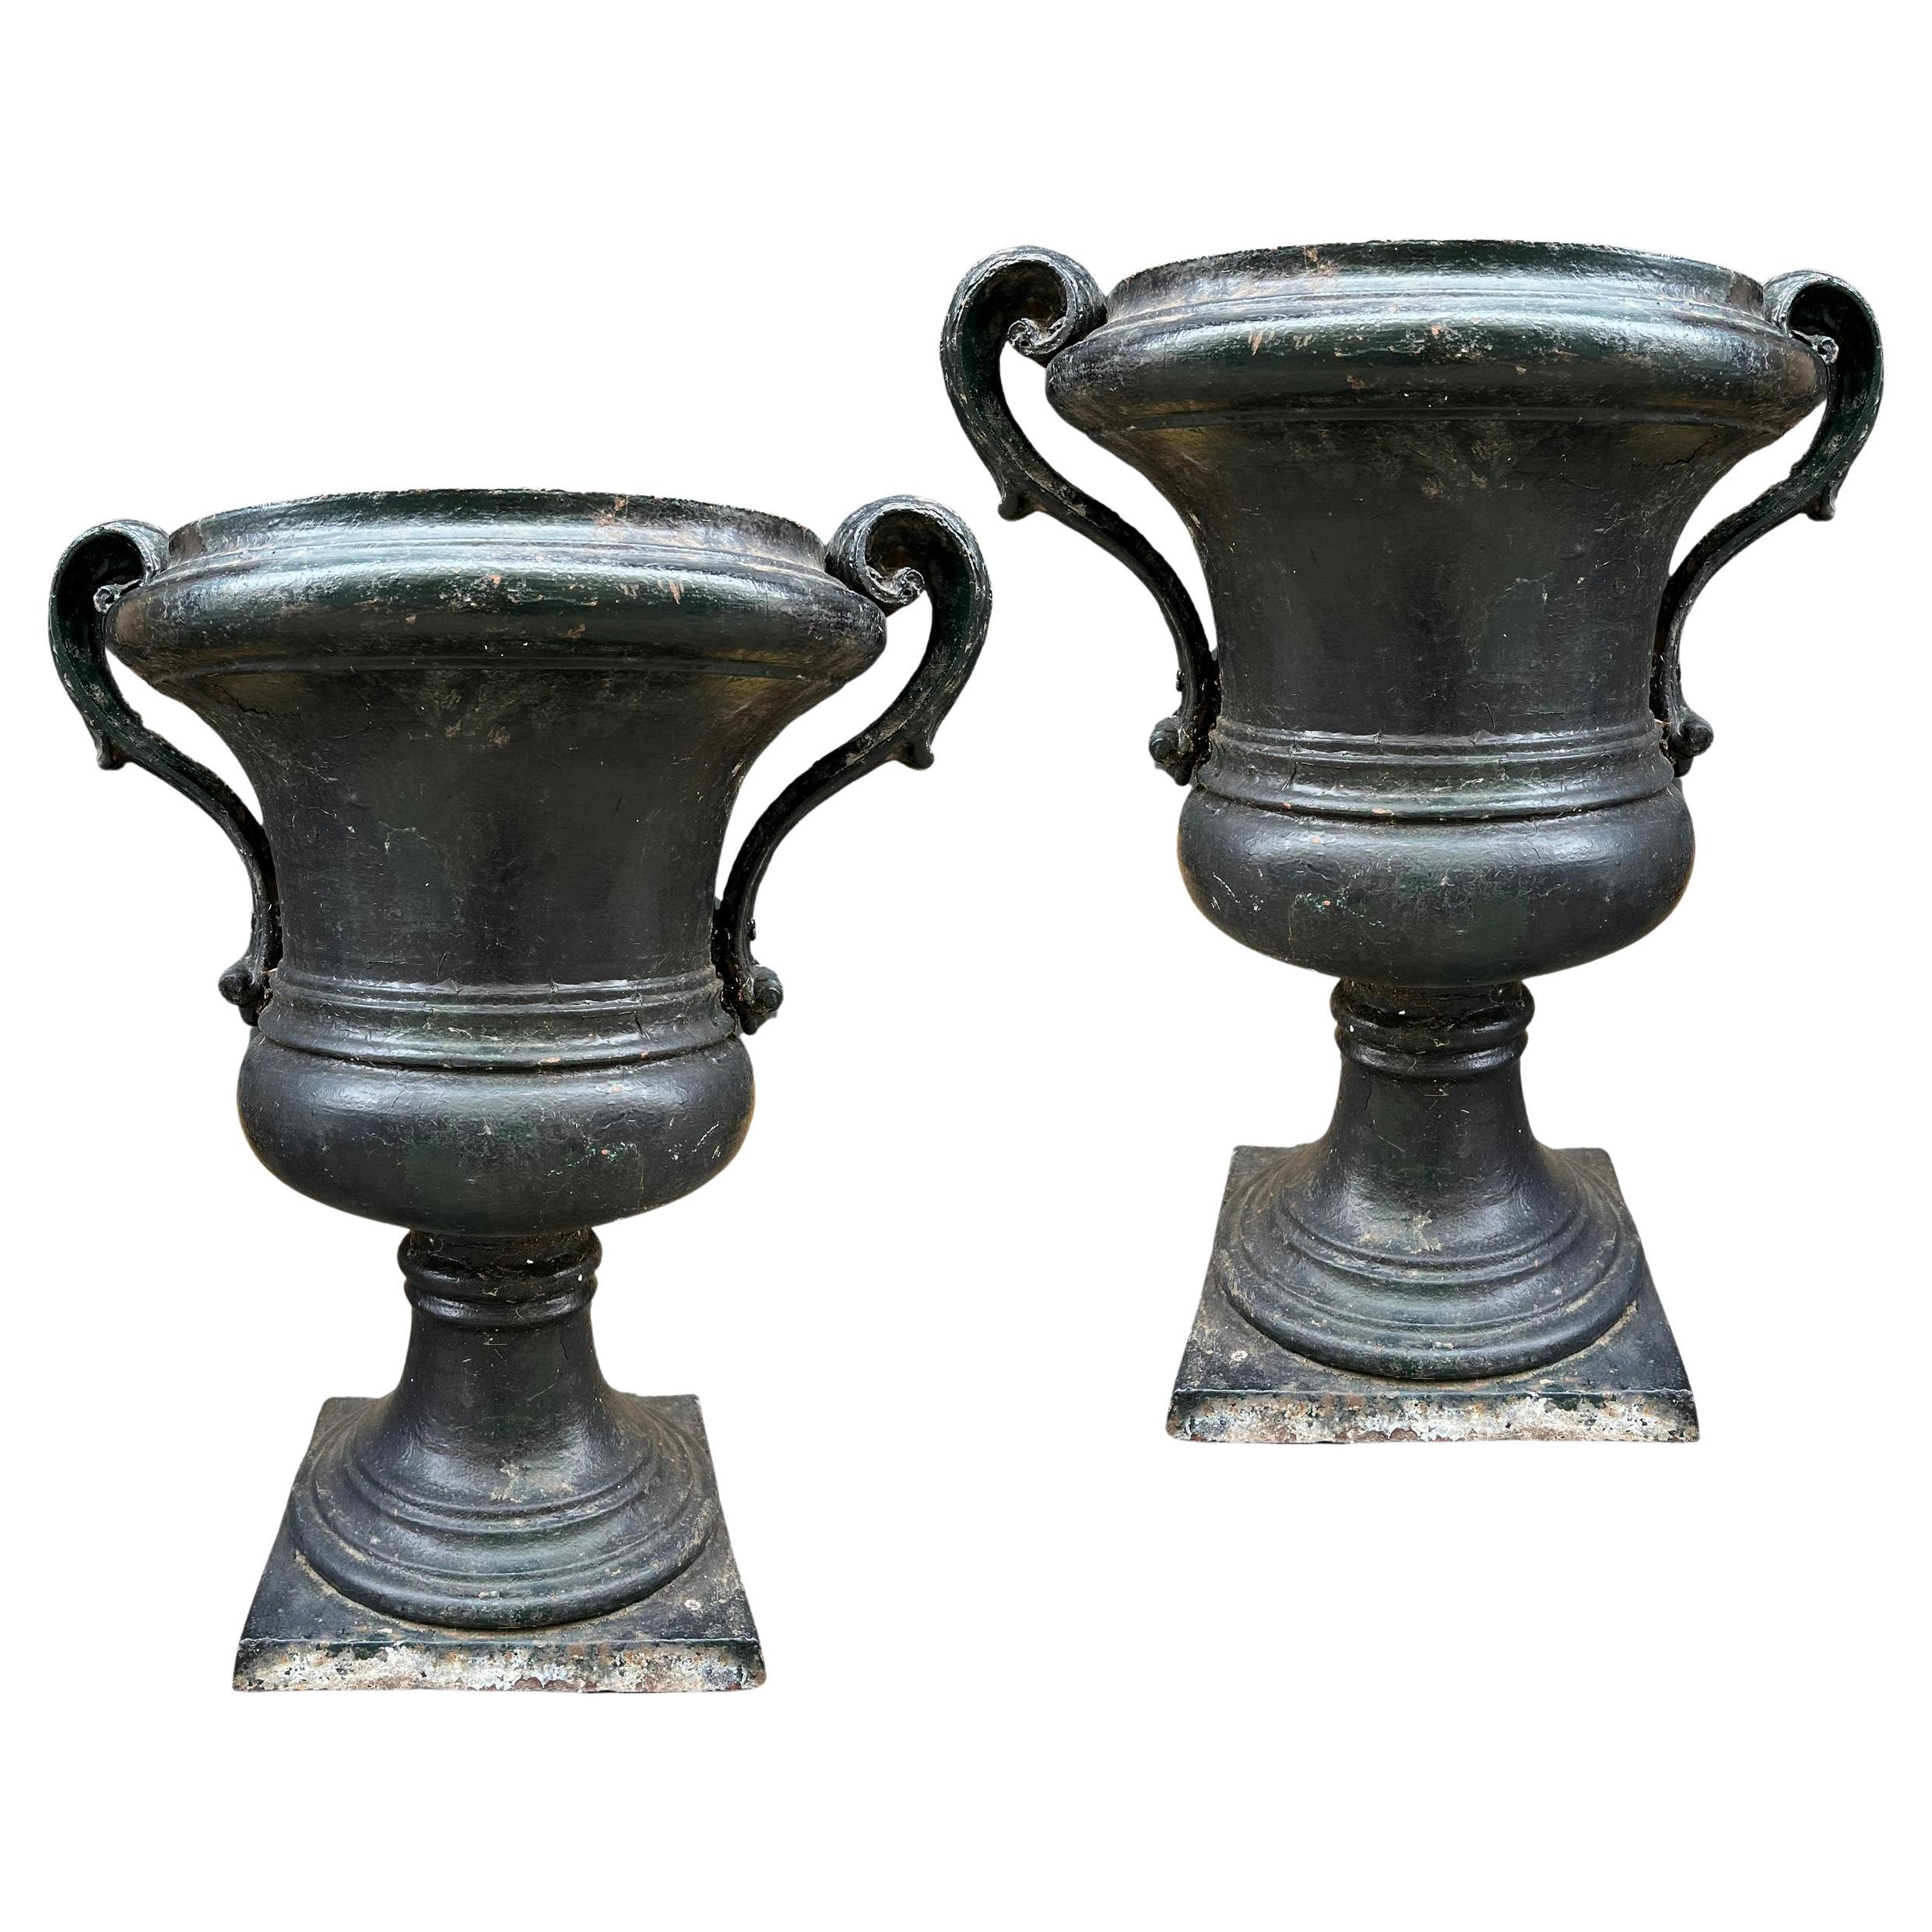 Pair of large Directoire-period cast-iron garden vases France, 1795 / 1799